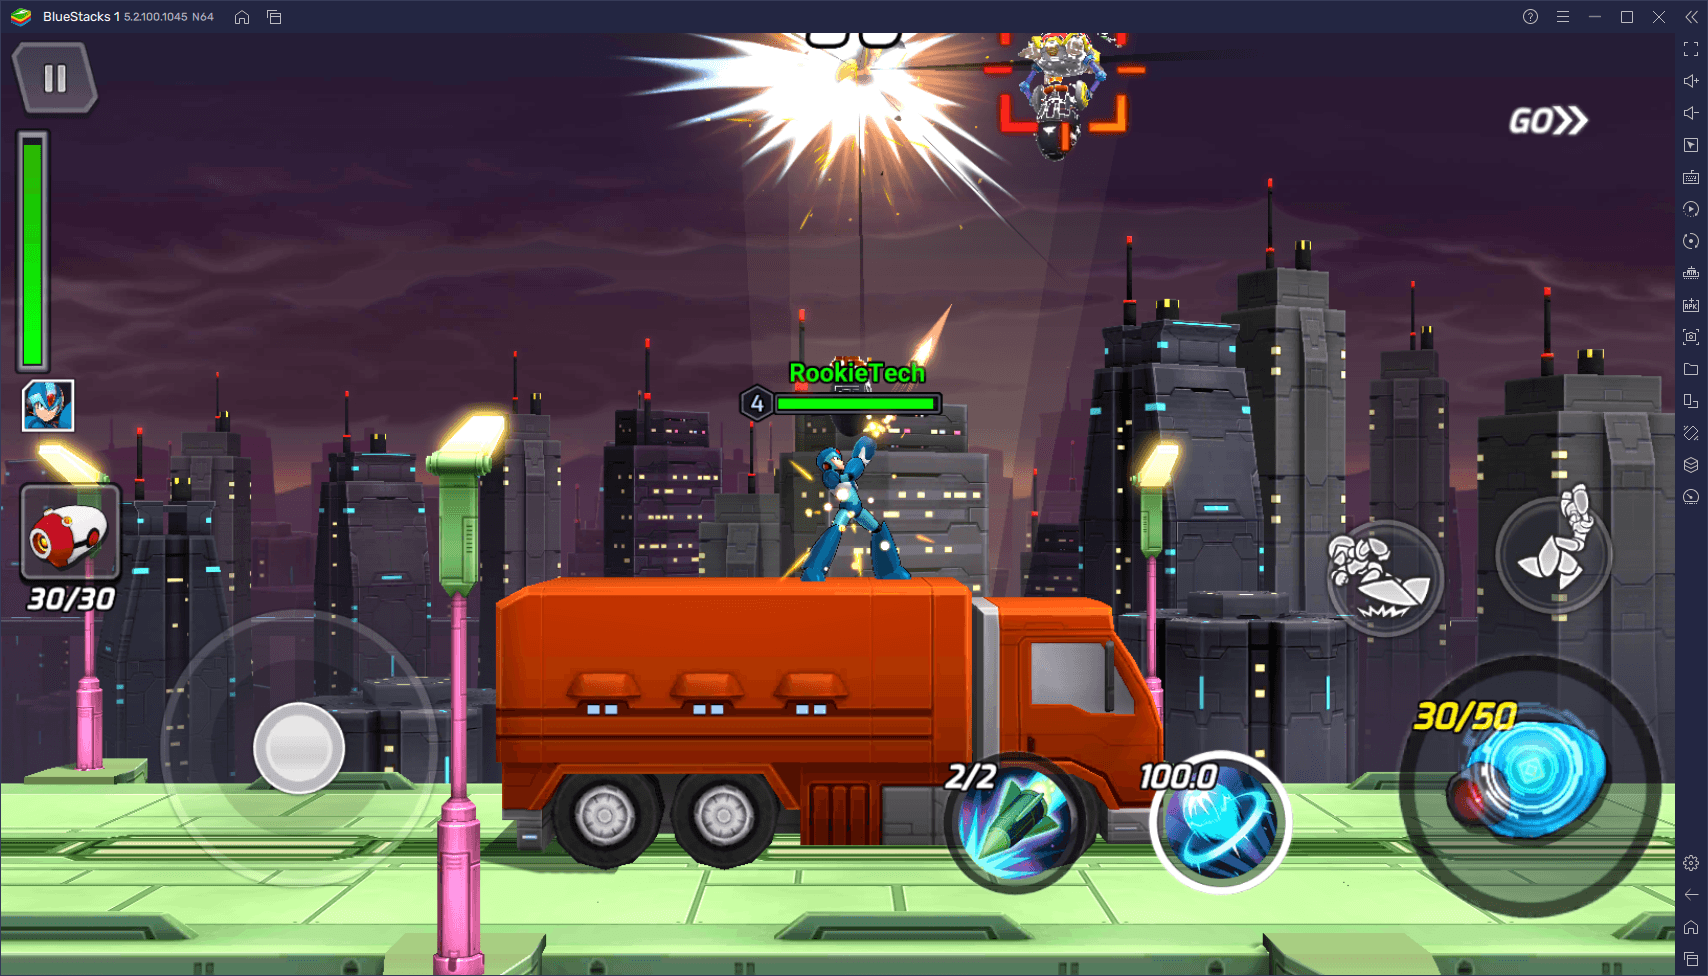 MEGA MAN X DiVE - MOBILE on PC - Guide for Playing at 60 FPS and Configuring Your Controls